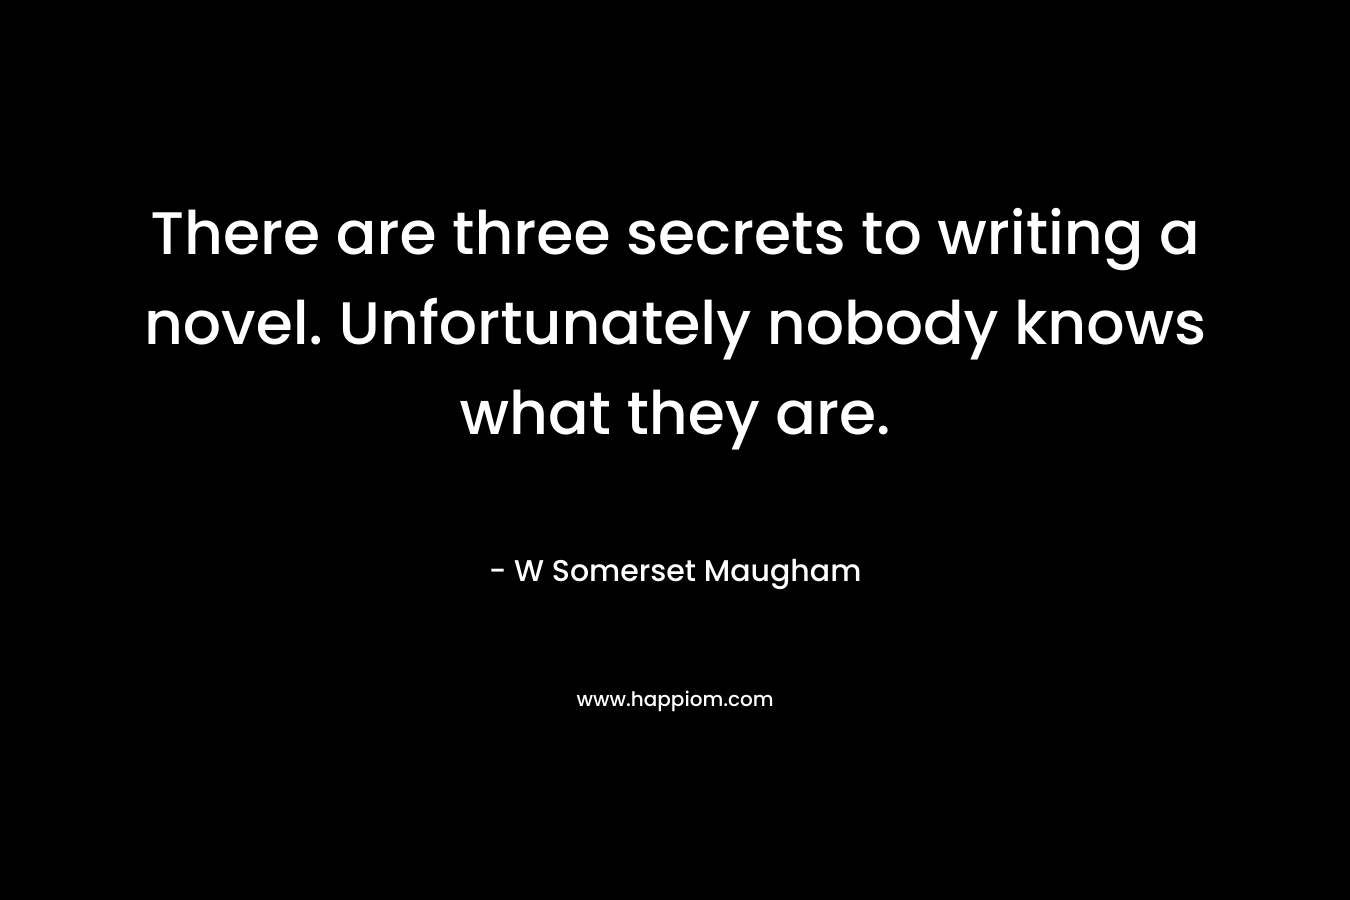 There are three secrets to writing a novel. Unfortunately nobody knows what they are. – W Somerset Maugham